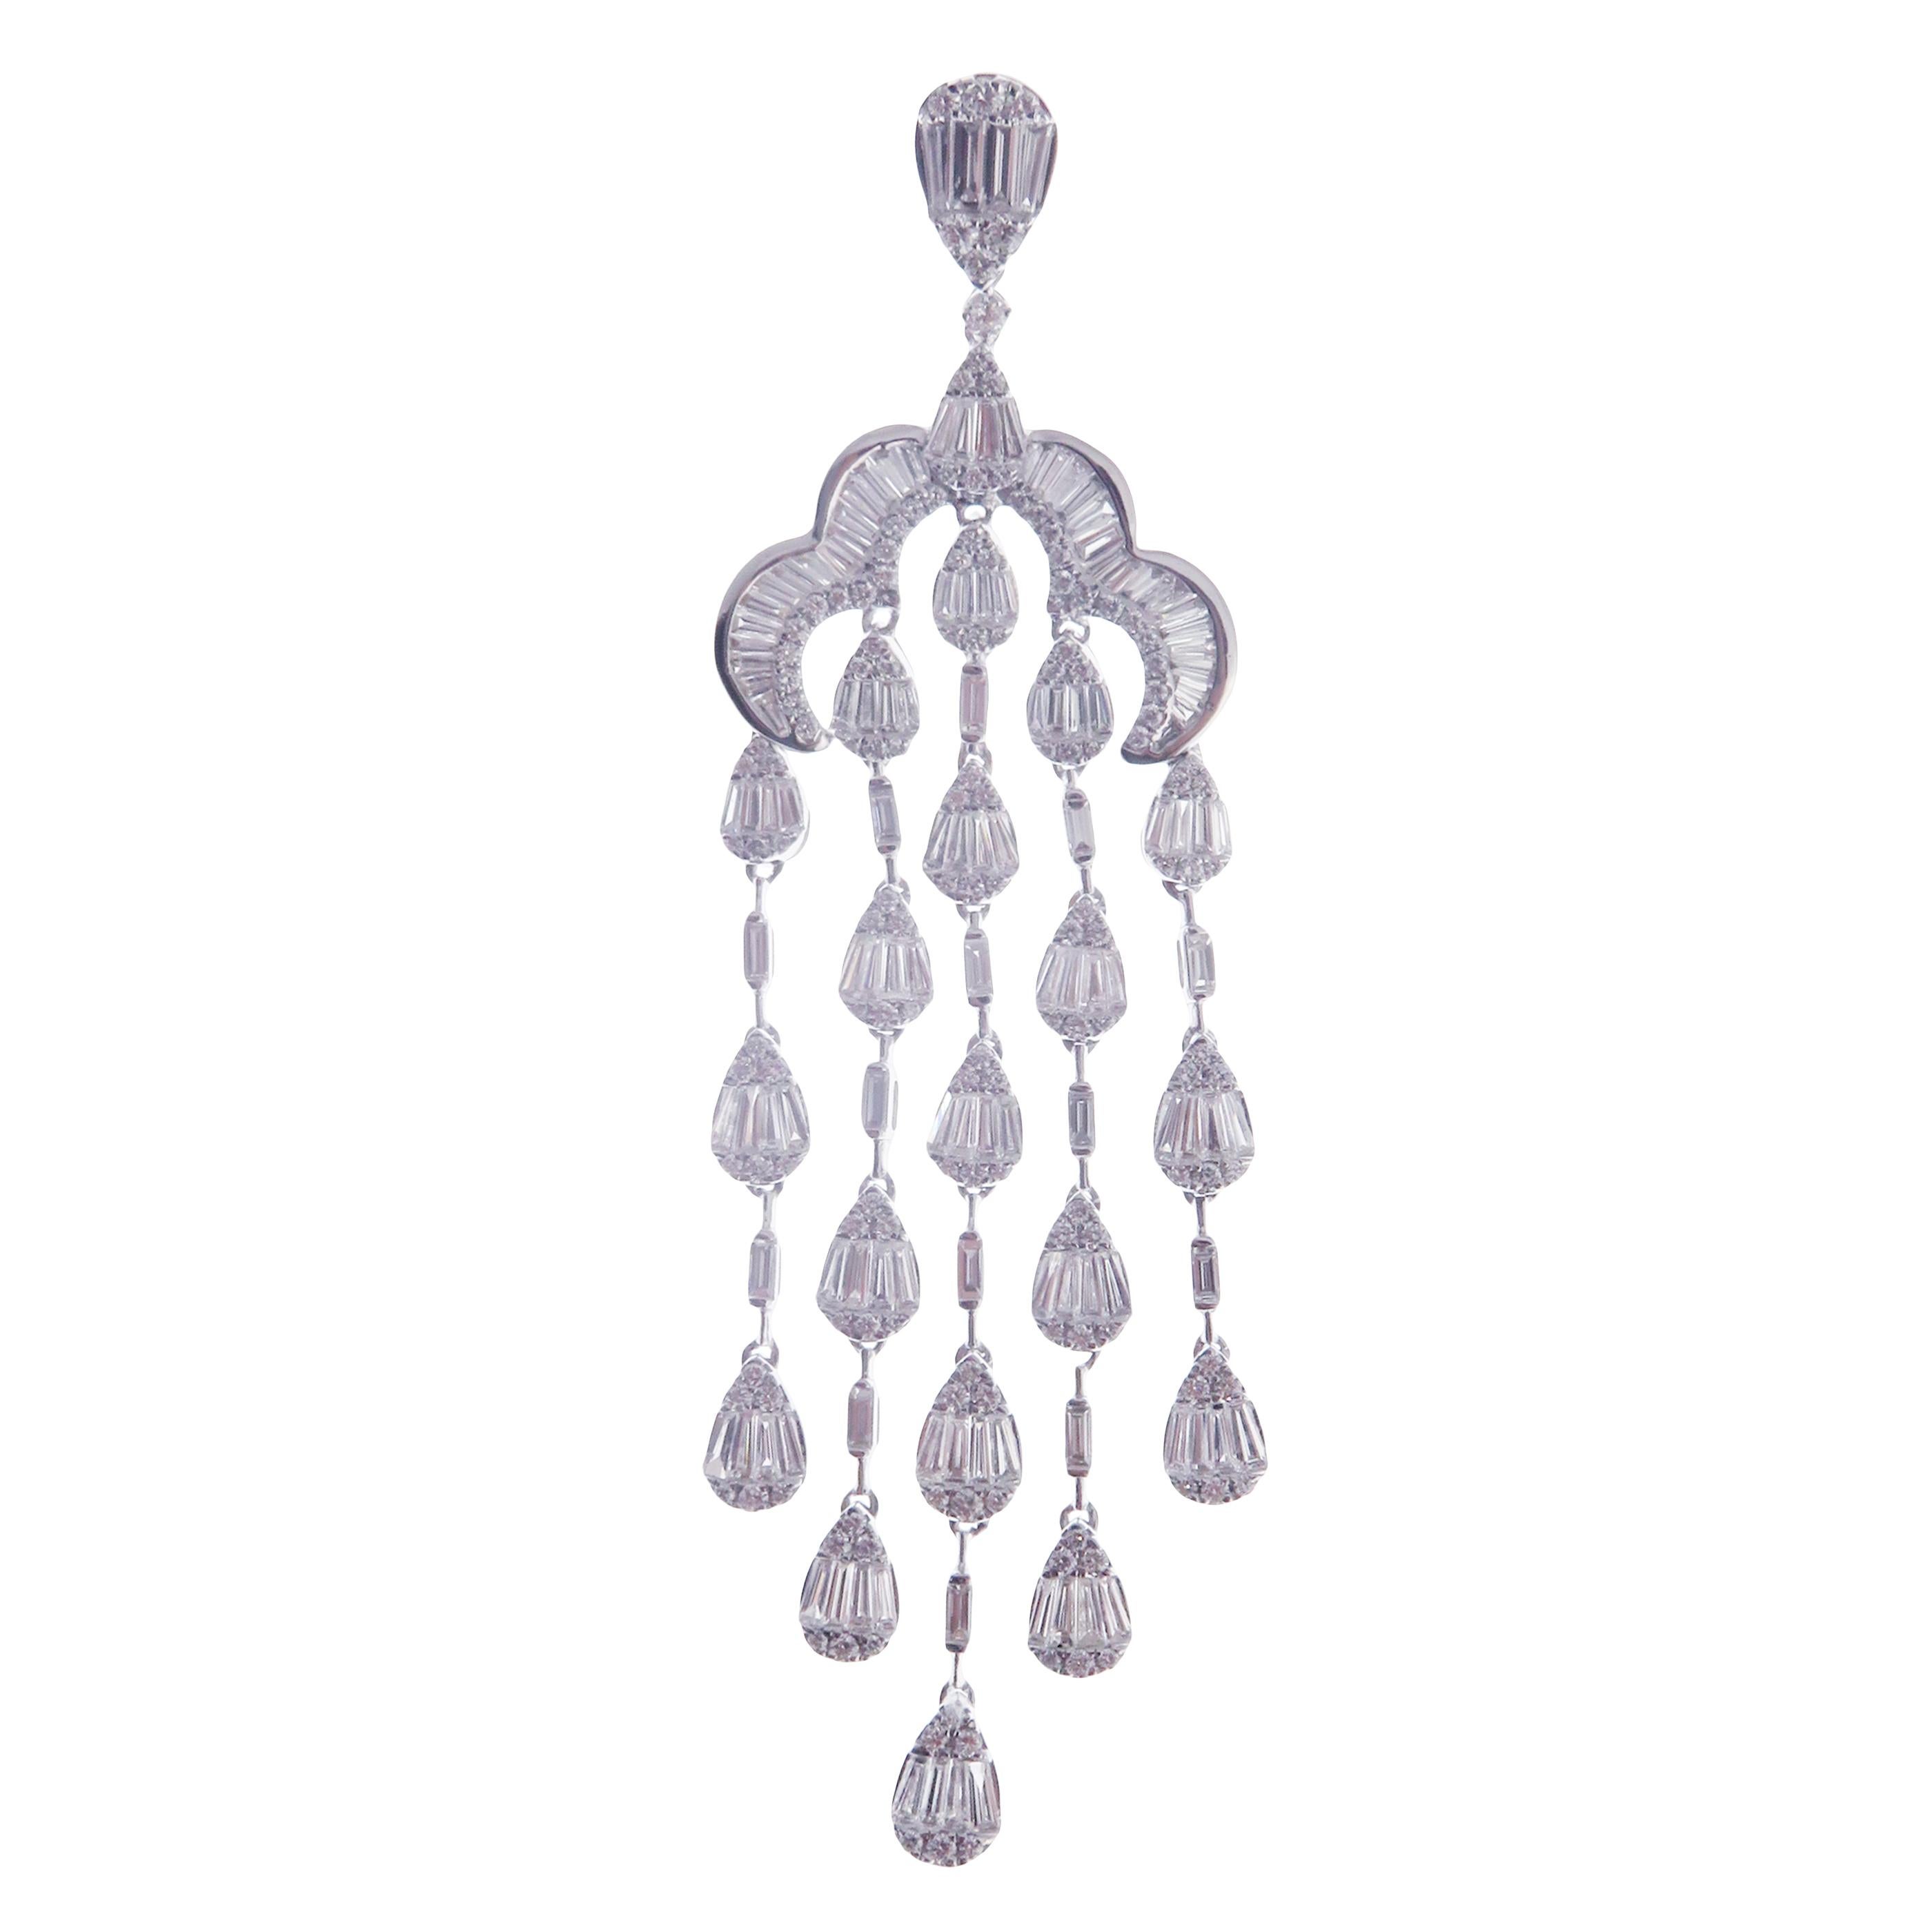 These pear chandelier earrings are crafted in 18-karat white gold, weighing approximately 10.20 total carats of SI-V Quality white diamond. French Clip backing. 

Our Ballroom Chandelier Collection feature earrings for those with bold/classy